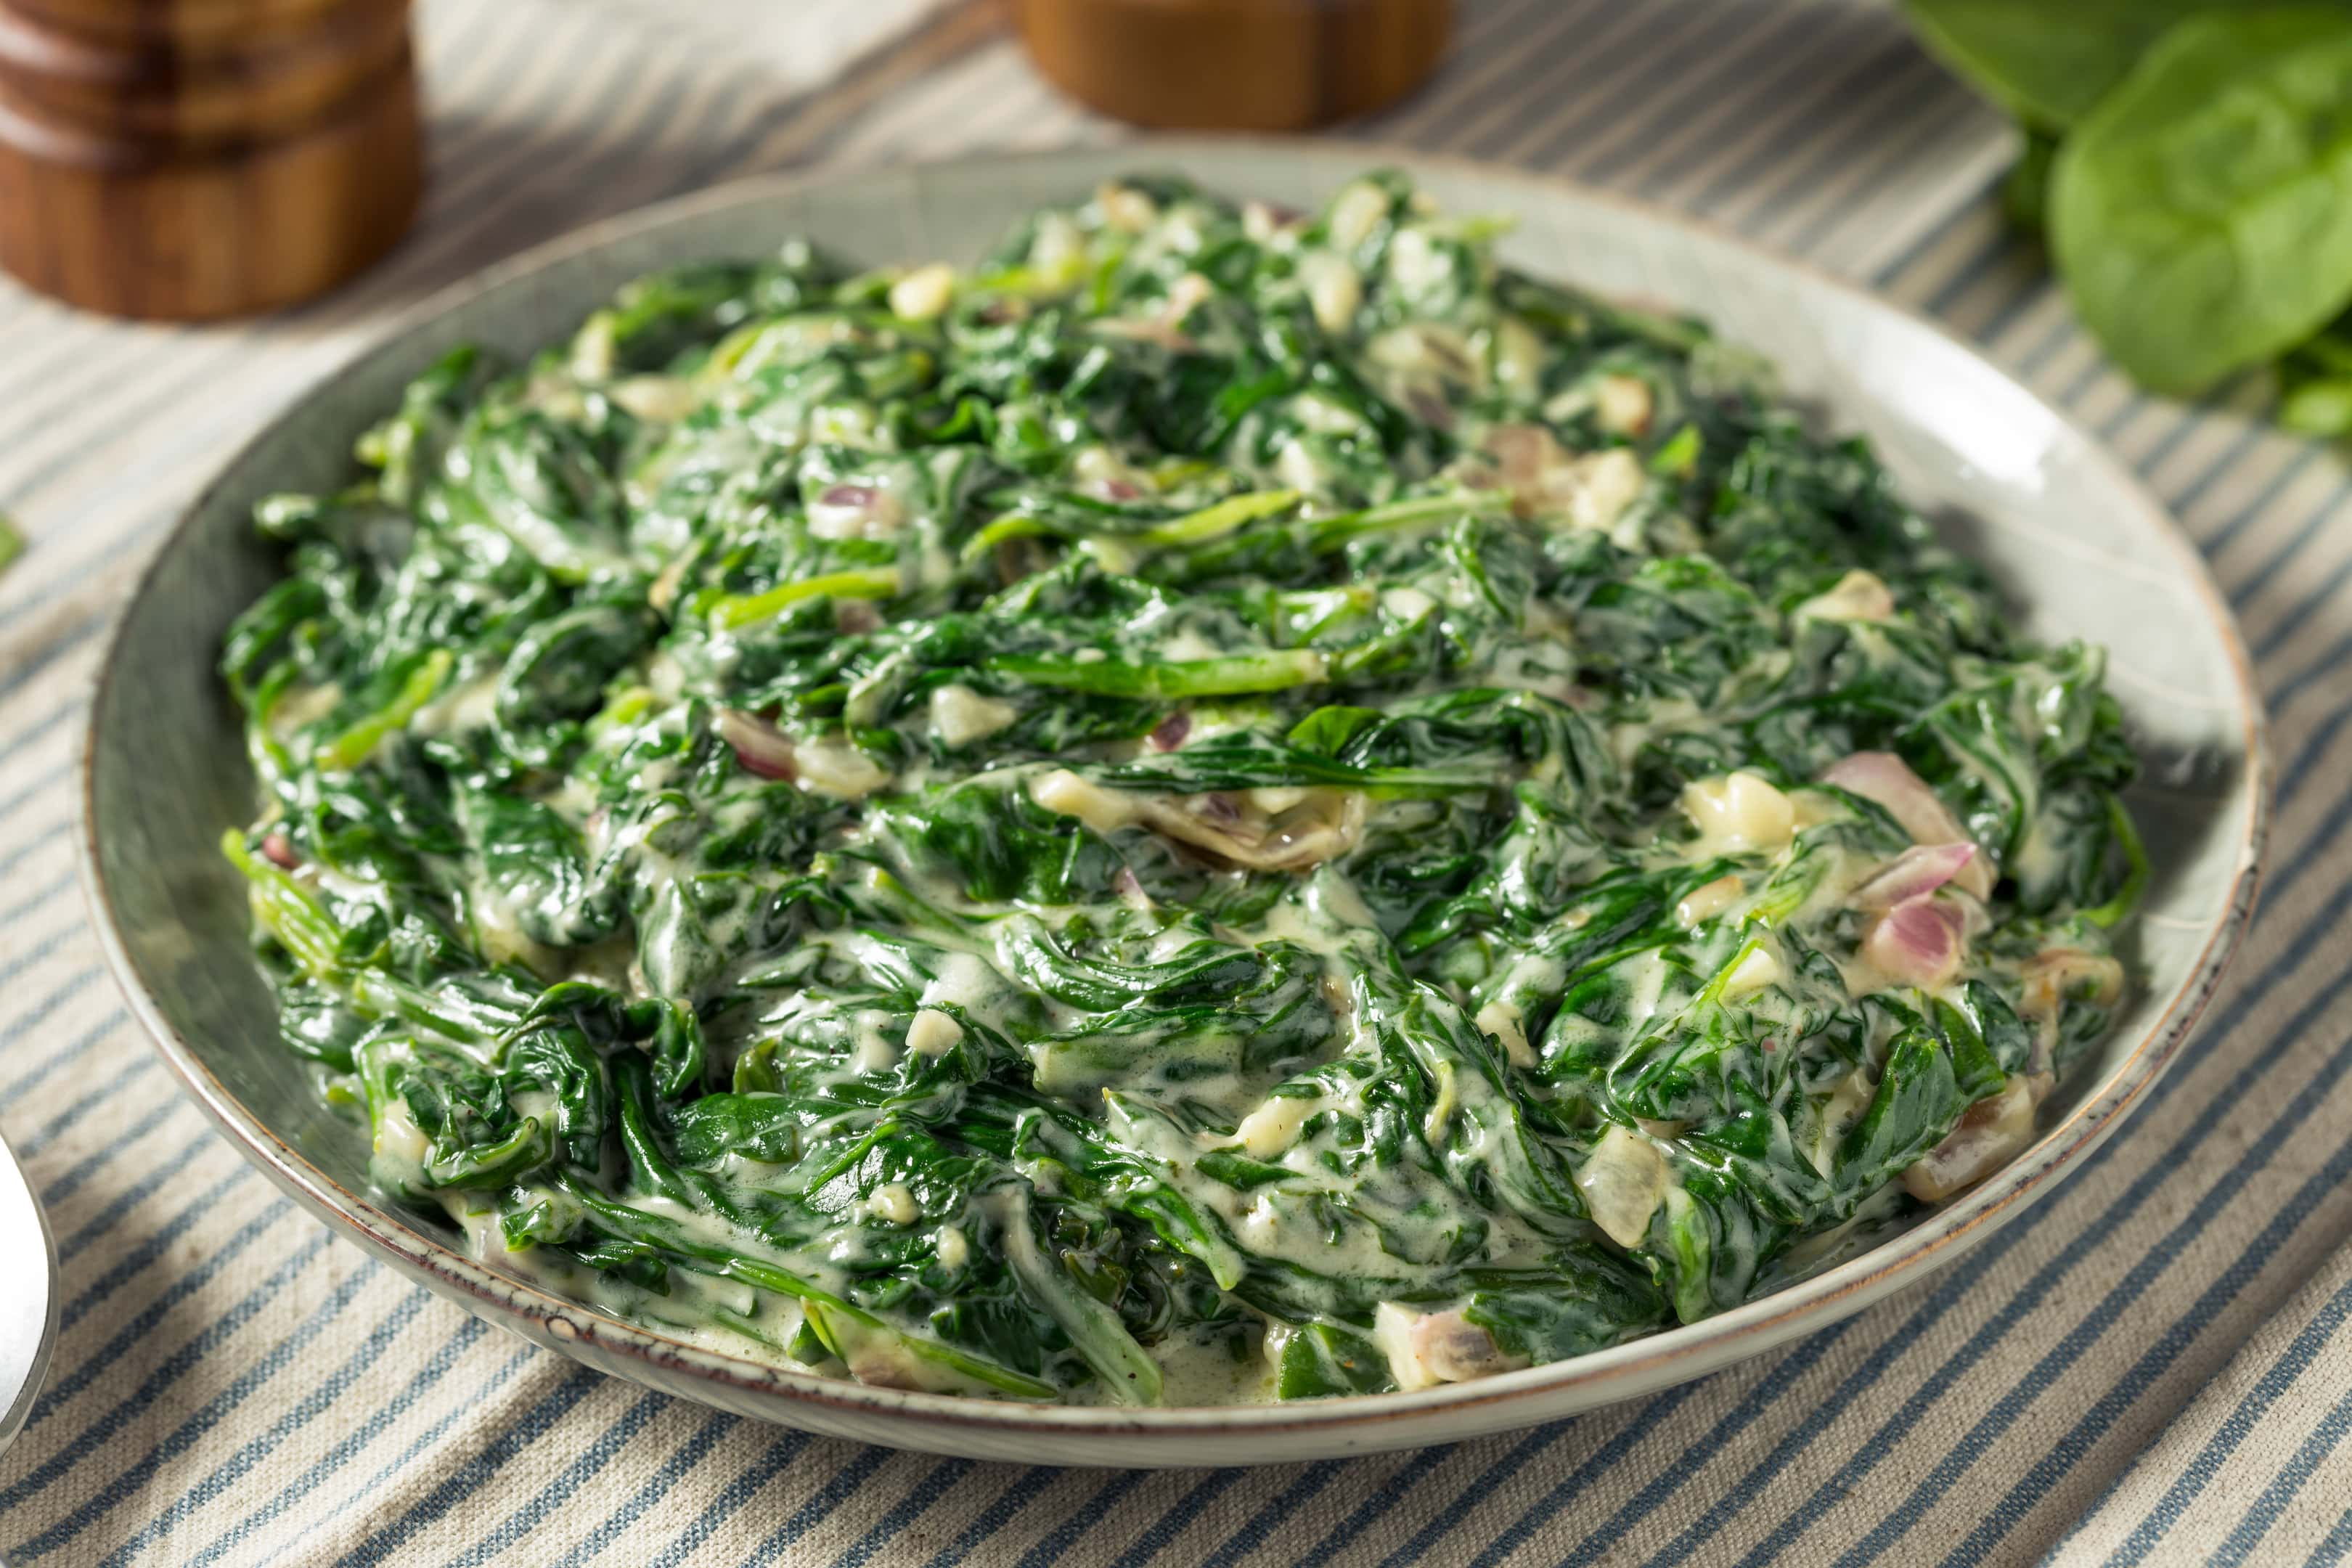 Homemade Ruth’s Chris creamed spinach recipe side dish